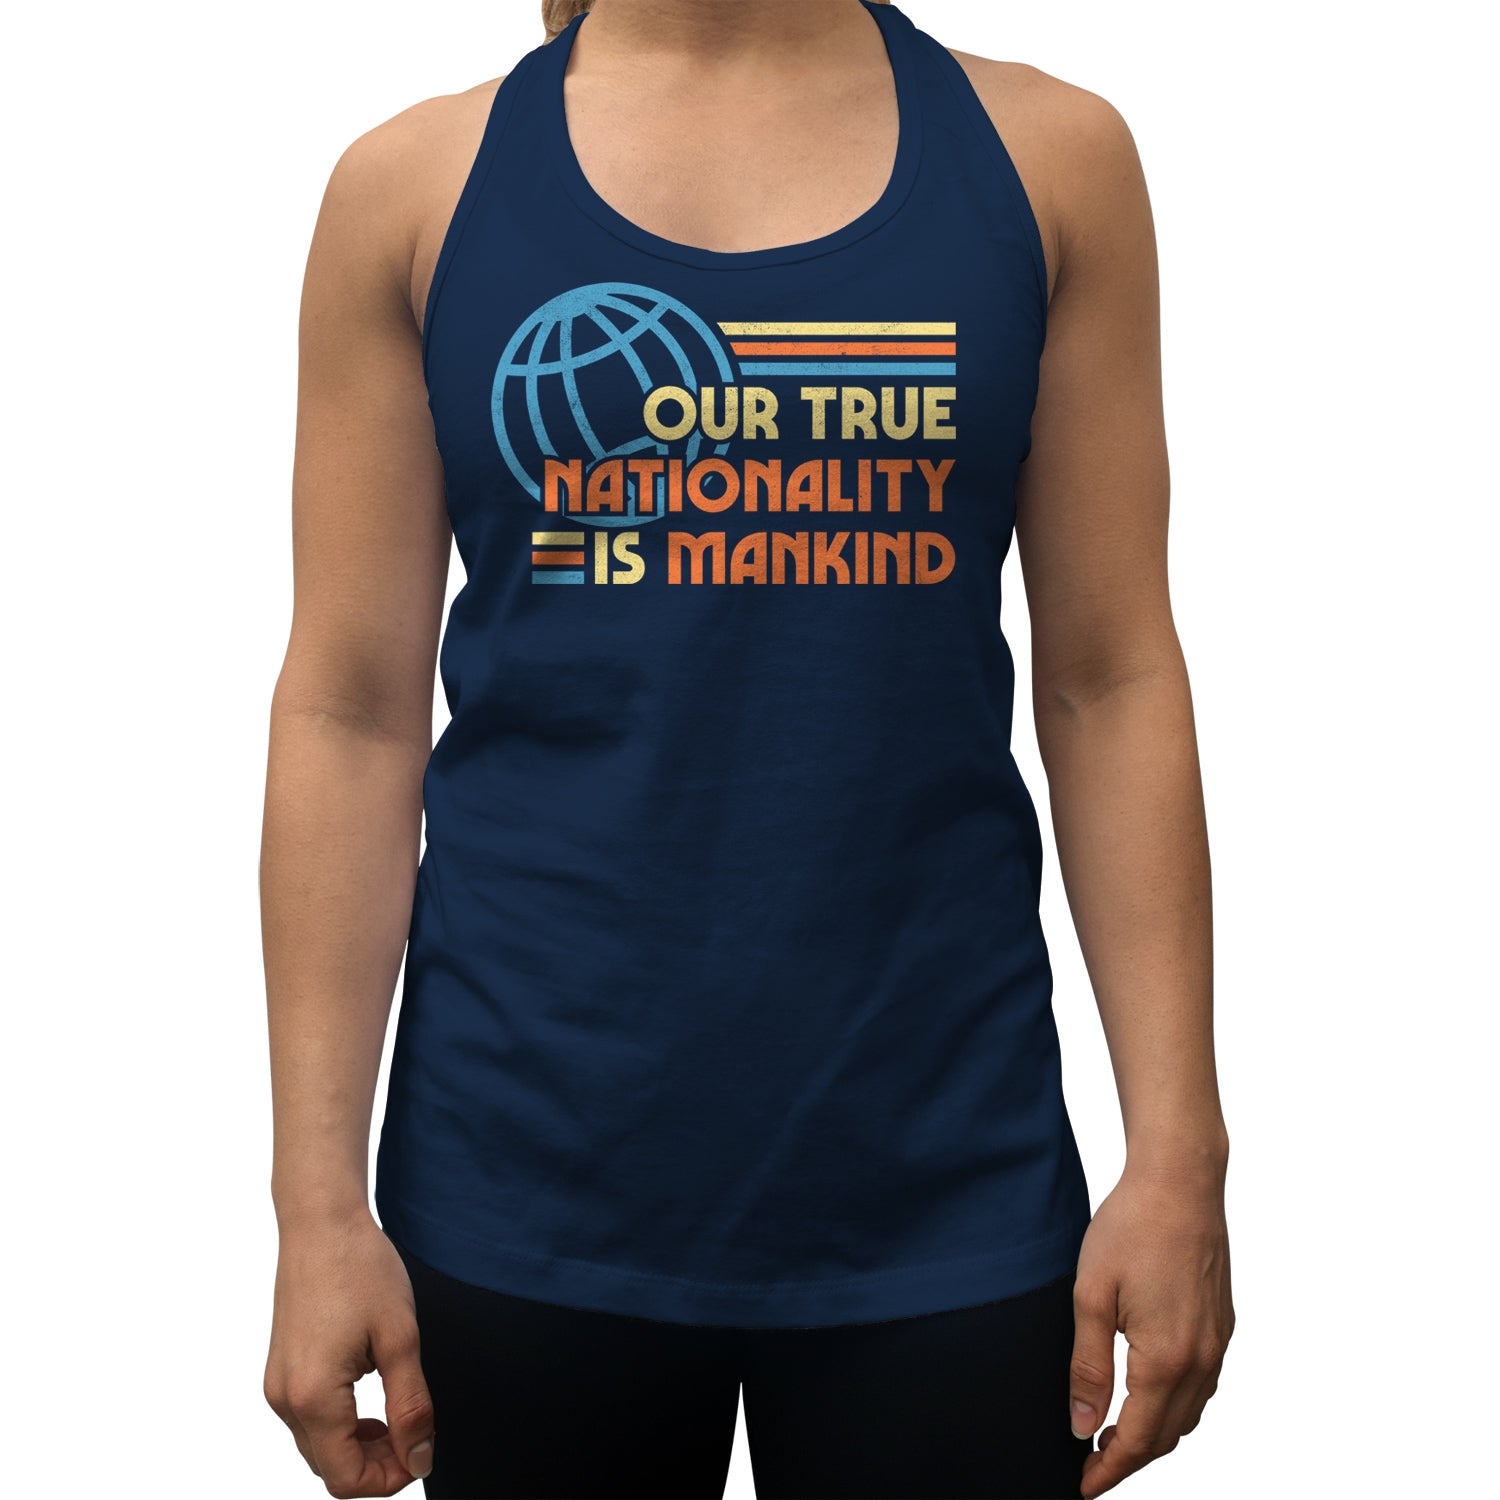 Women's Our True Nationality is Mankind Racerback Tank Top